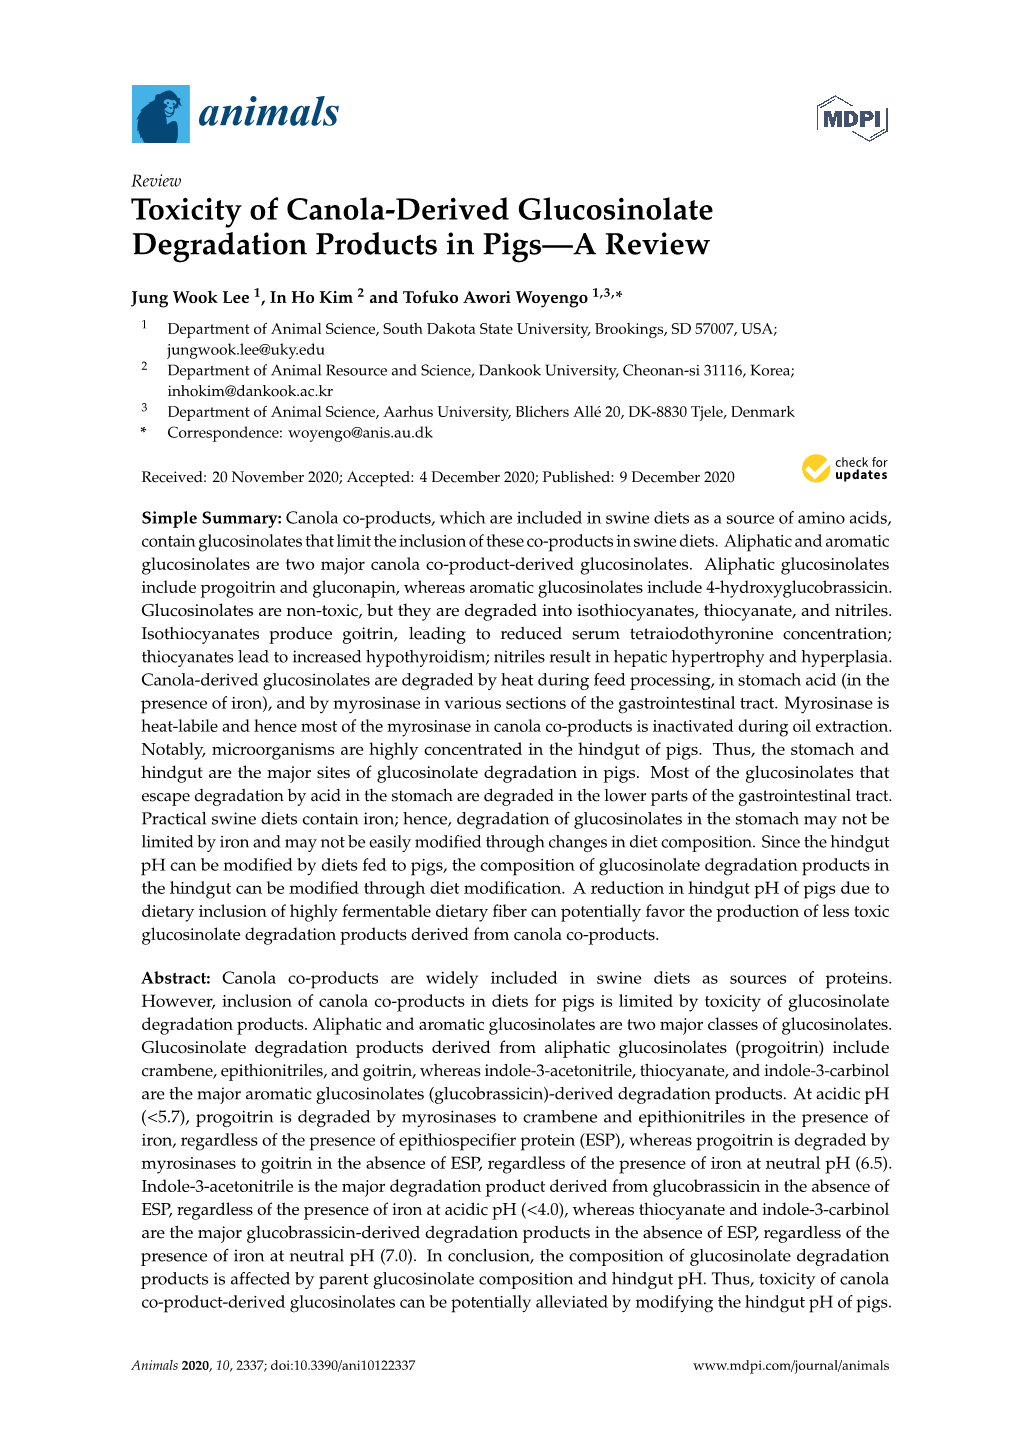 Toxicity of Canola-Derived Glucosinolate Degradation Products in Pigs—A Review